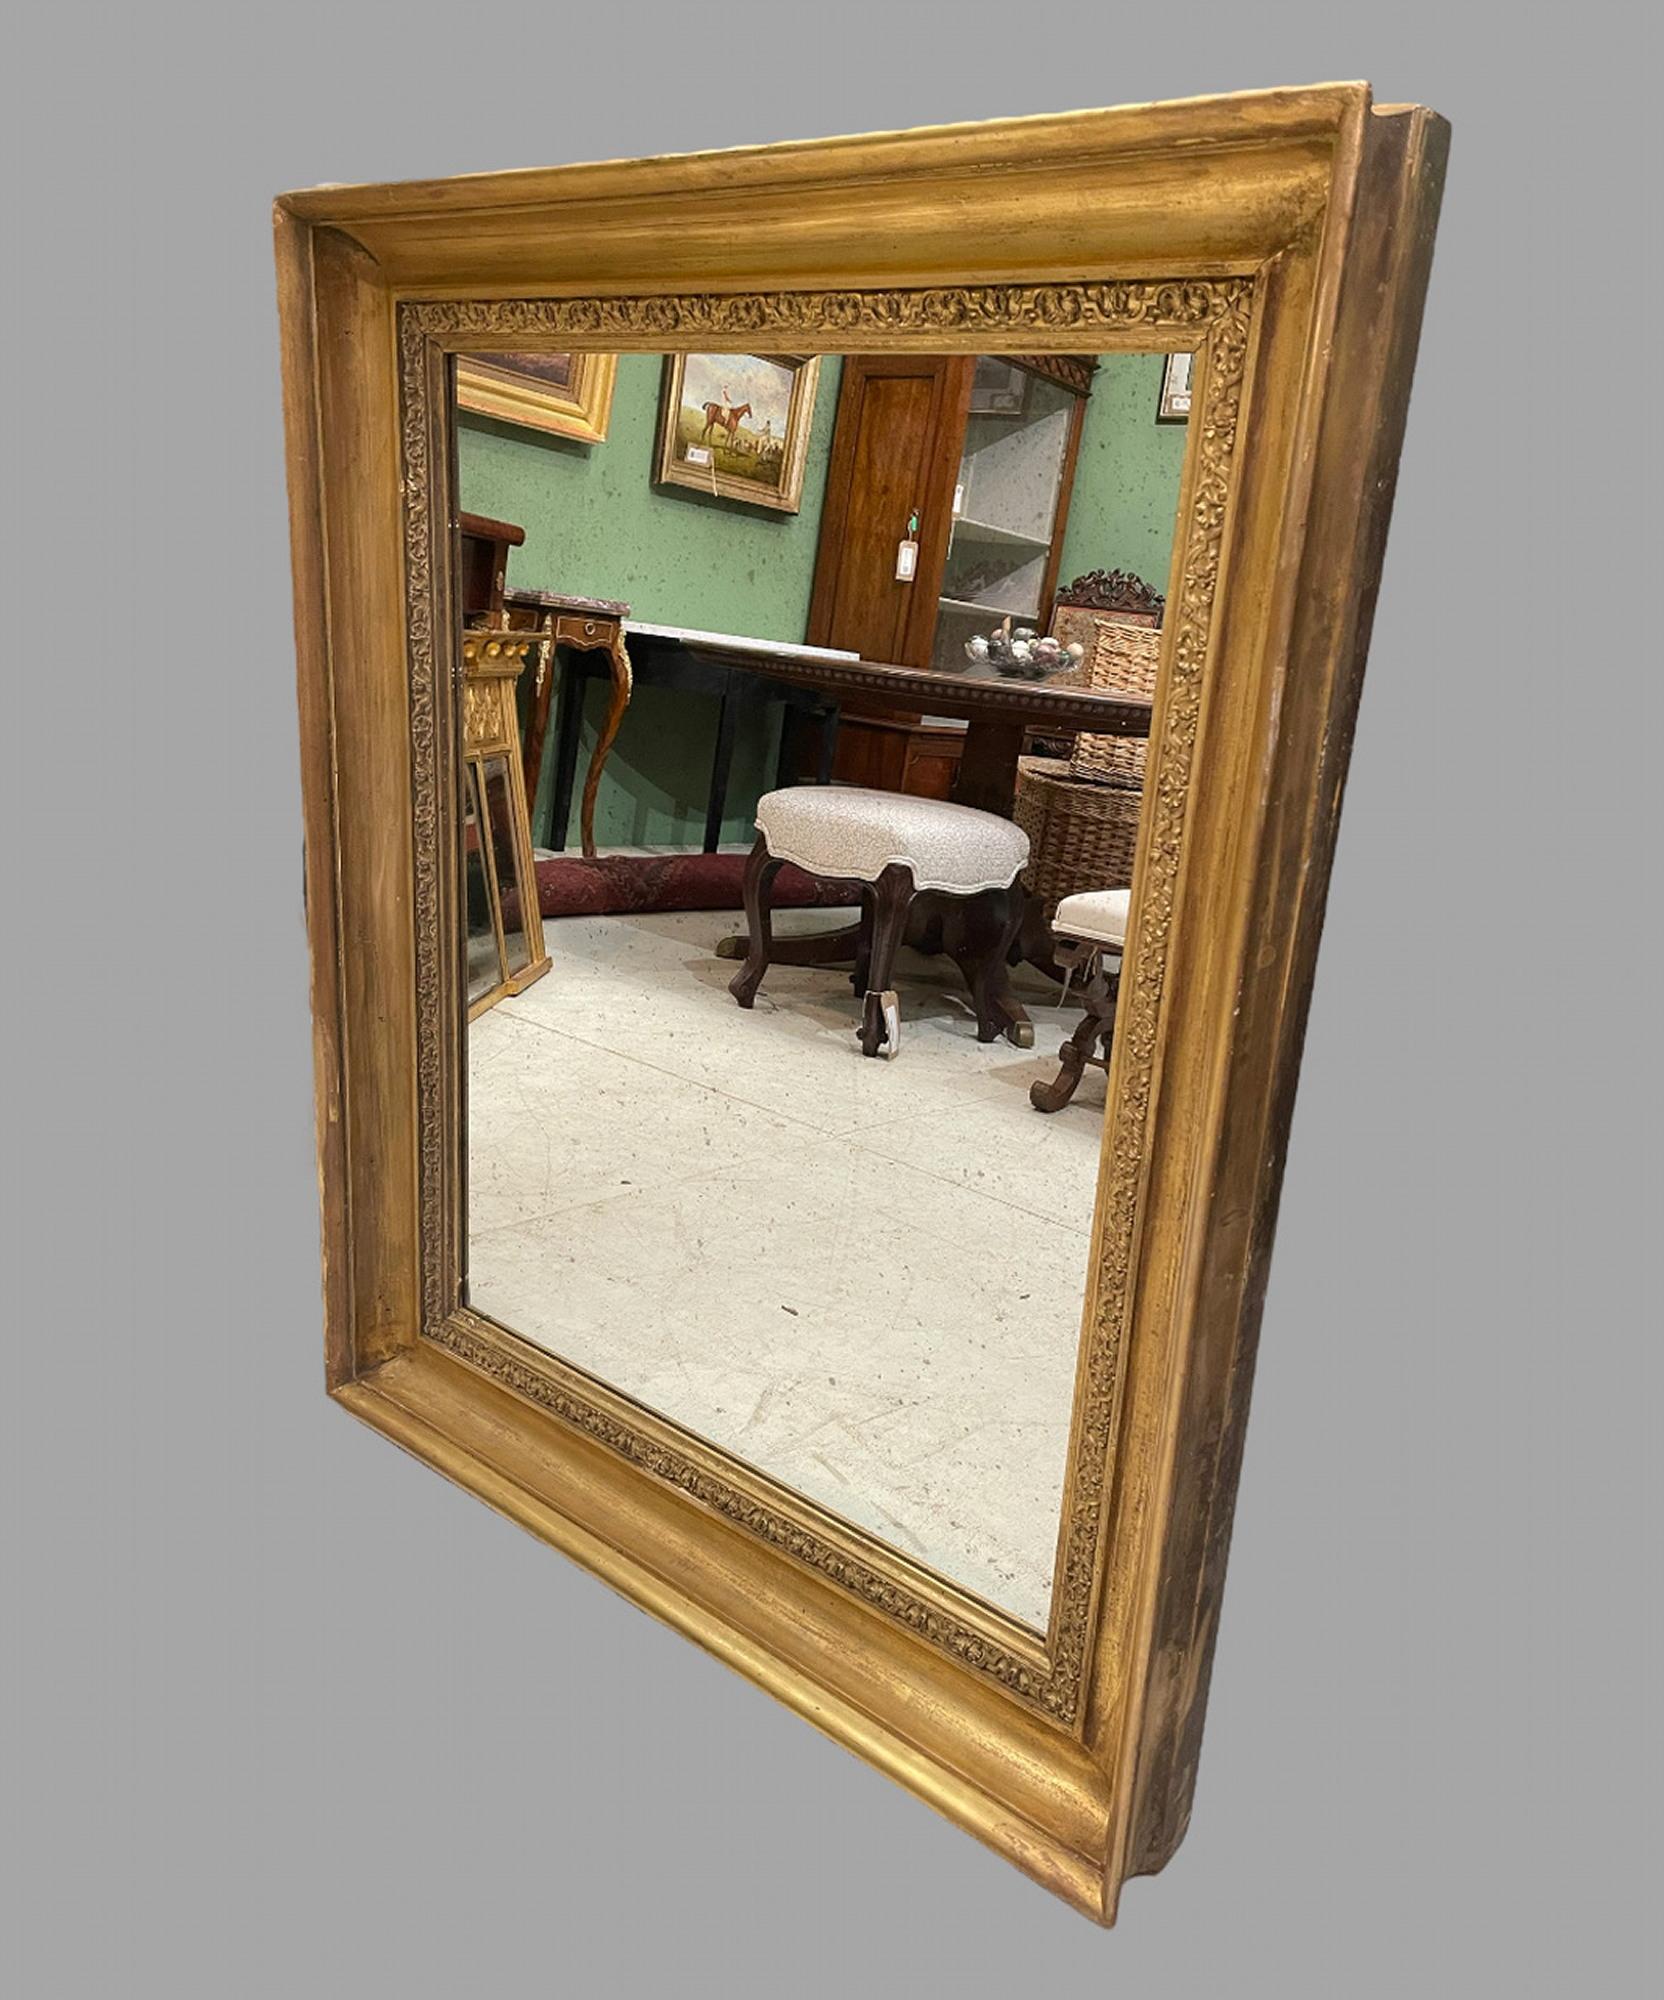 A Good Sized 19th Century Wall or Over Mantle Mirror that has a later antique mirror plate